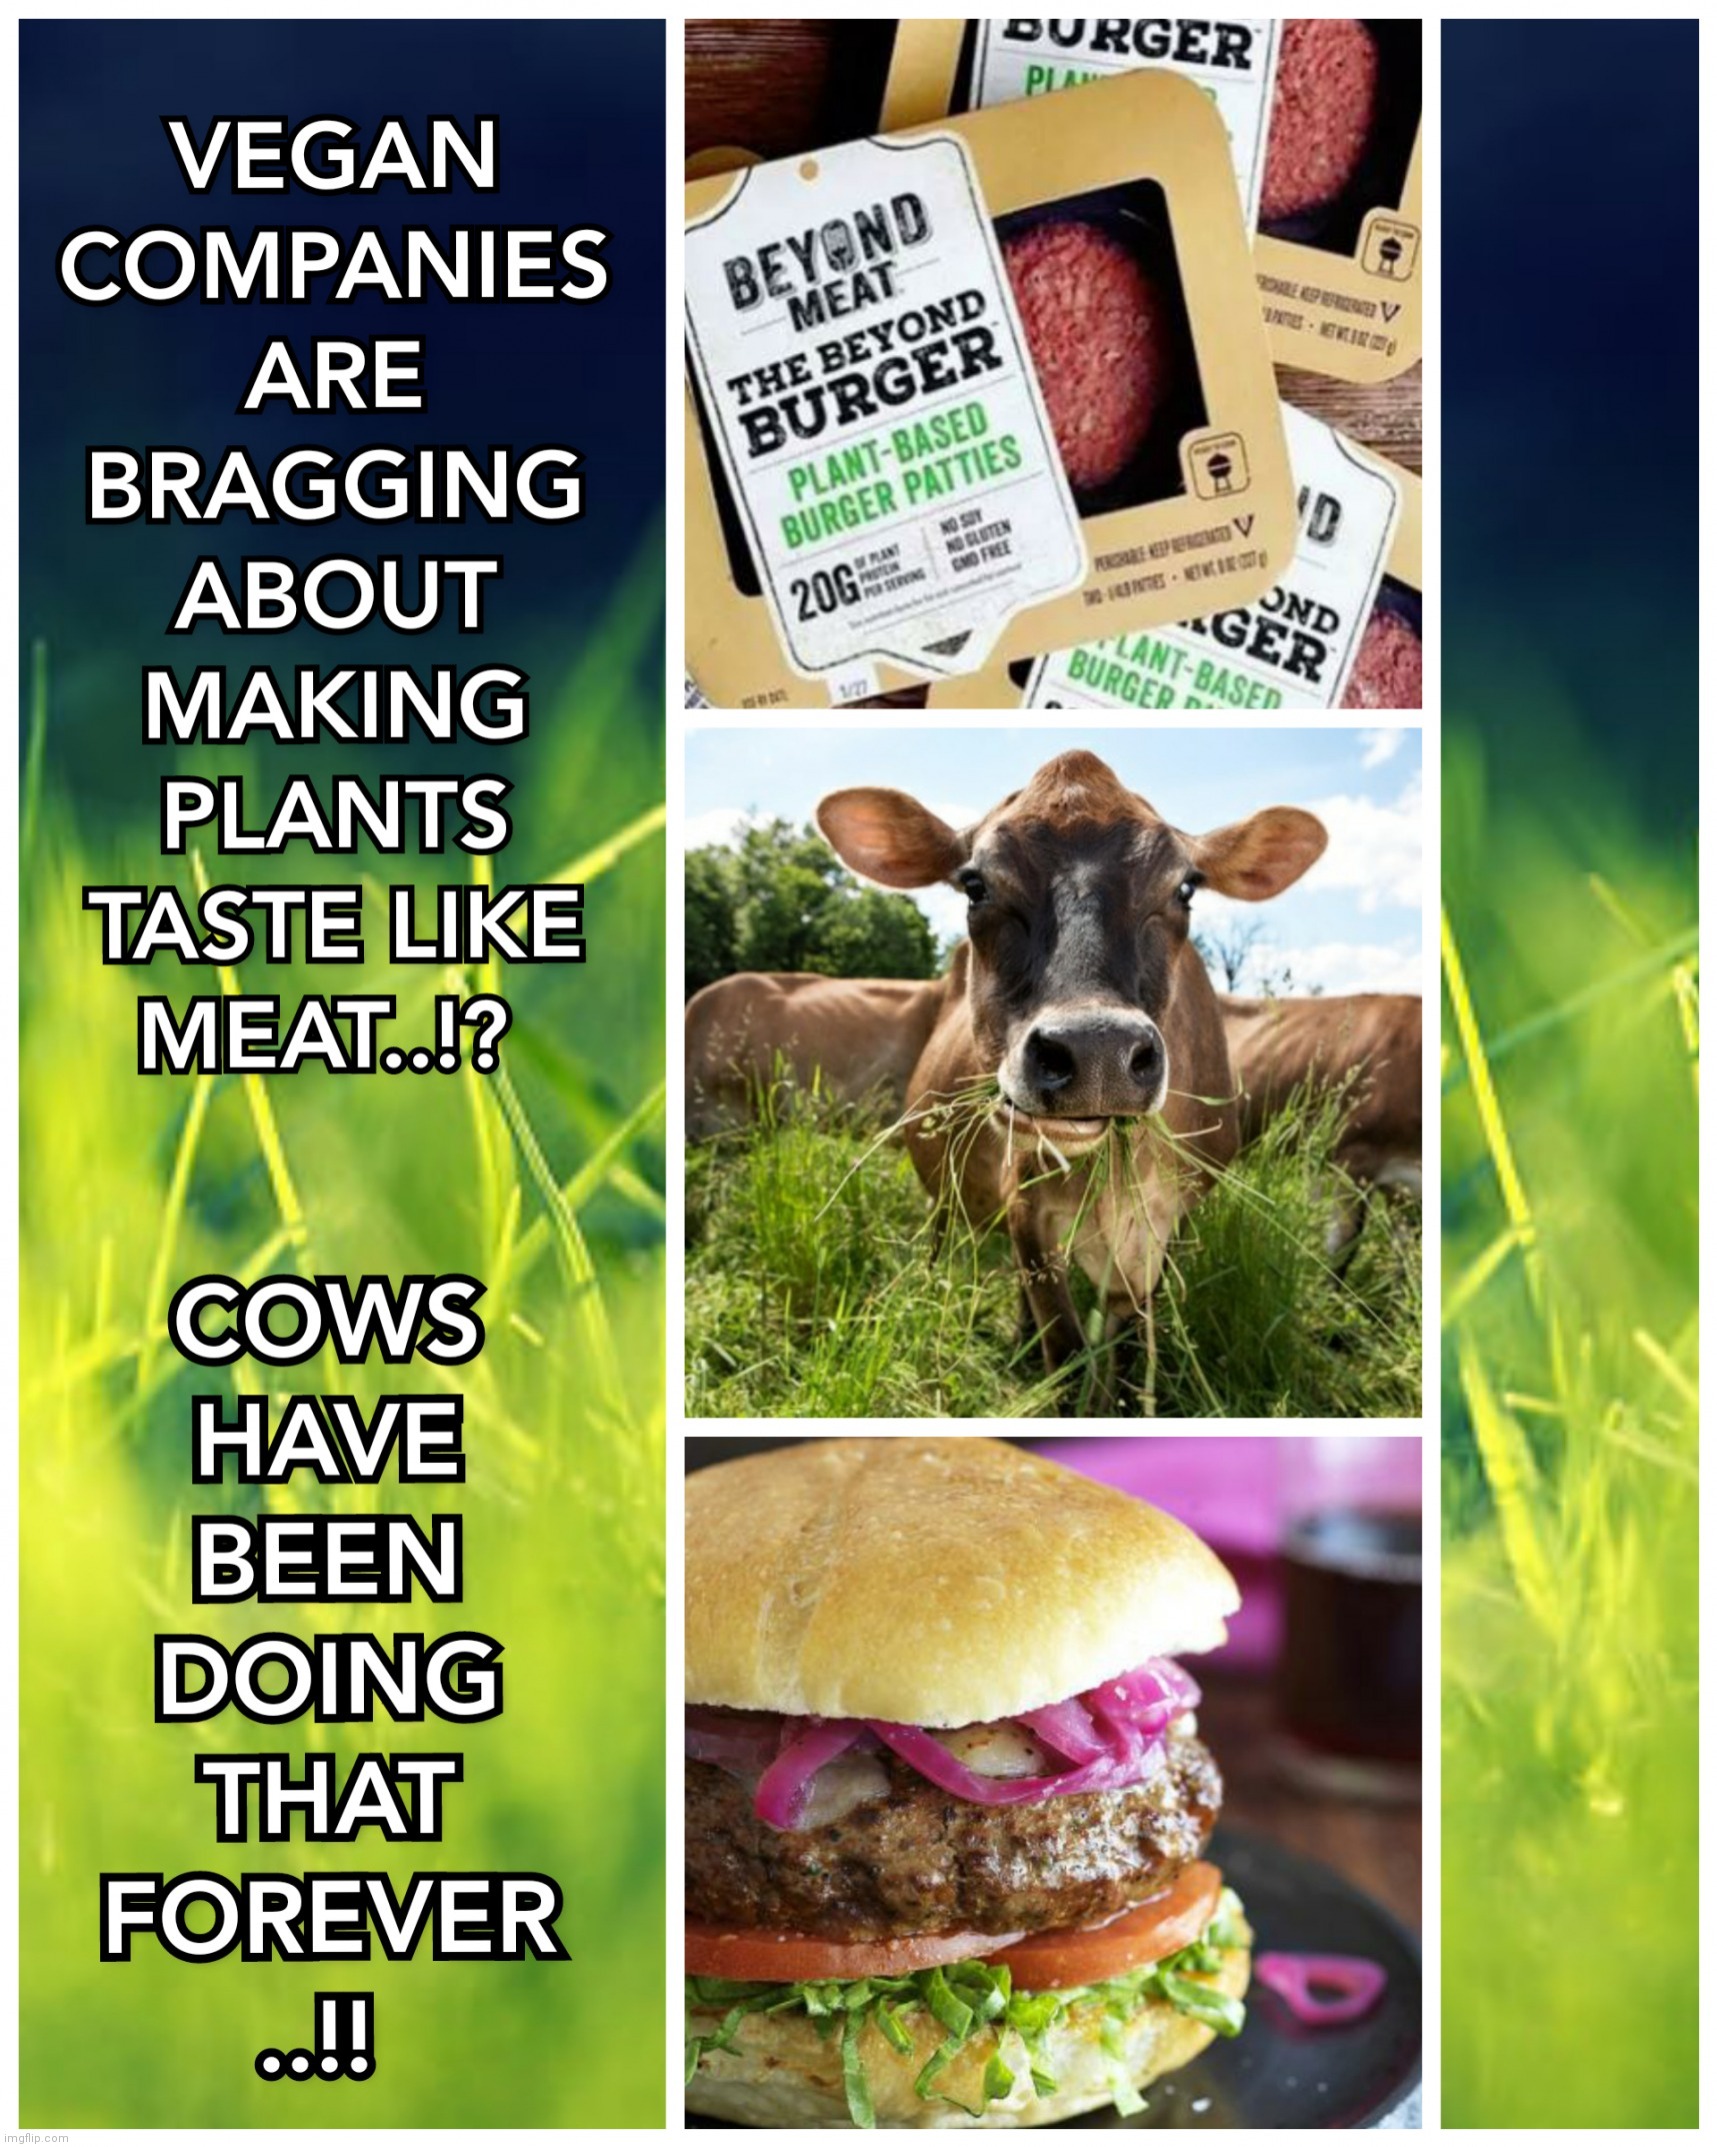 VEGAN COMPANIES ARE BRAGGING ABOUT MAKING  PLANTS TASTE LIKE MEAT..!? COWS HAVE BEEN DOING THAT FOREVER..!! | image tagged in meat,hamburger,vegan,company,memes,cows | made w/ Imgflip meme maker